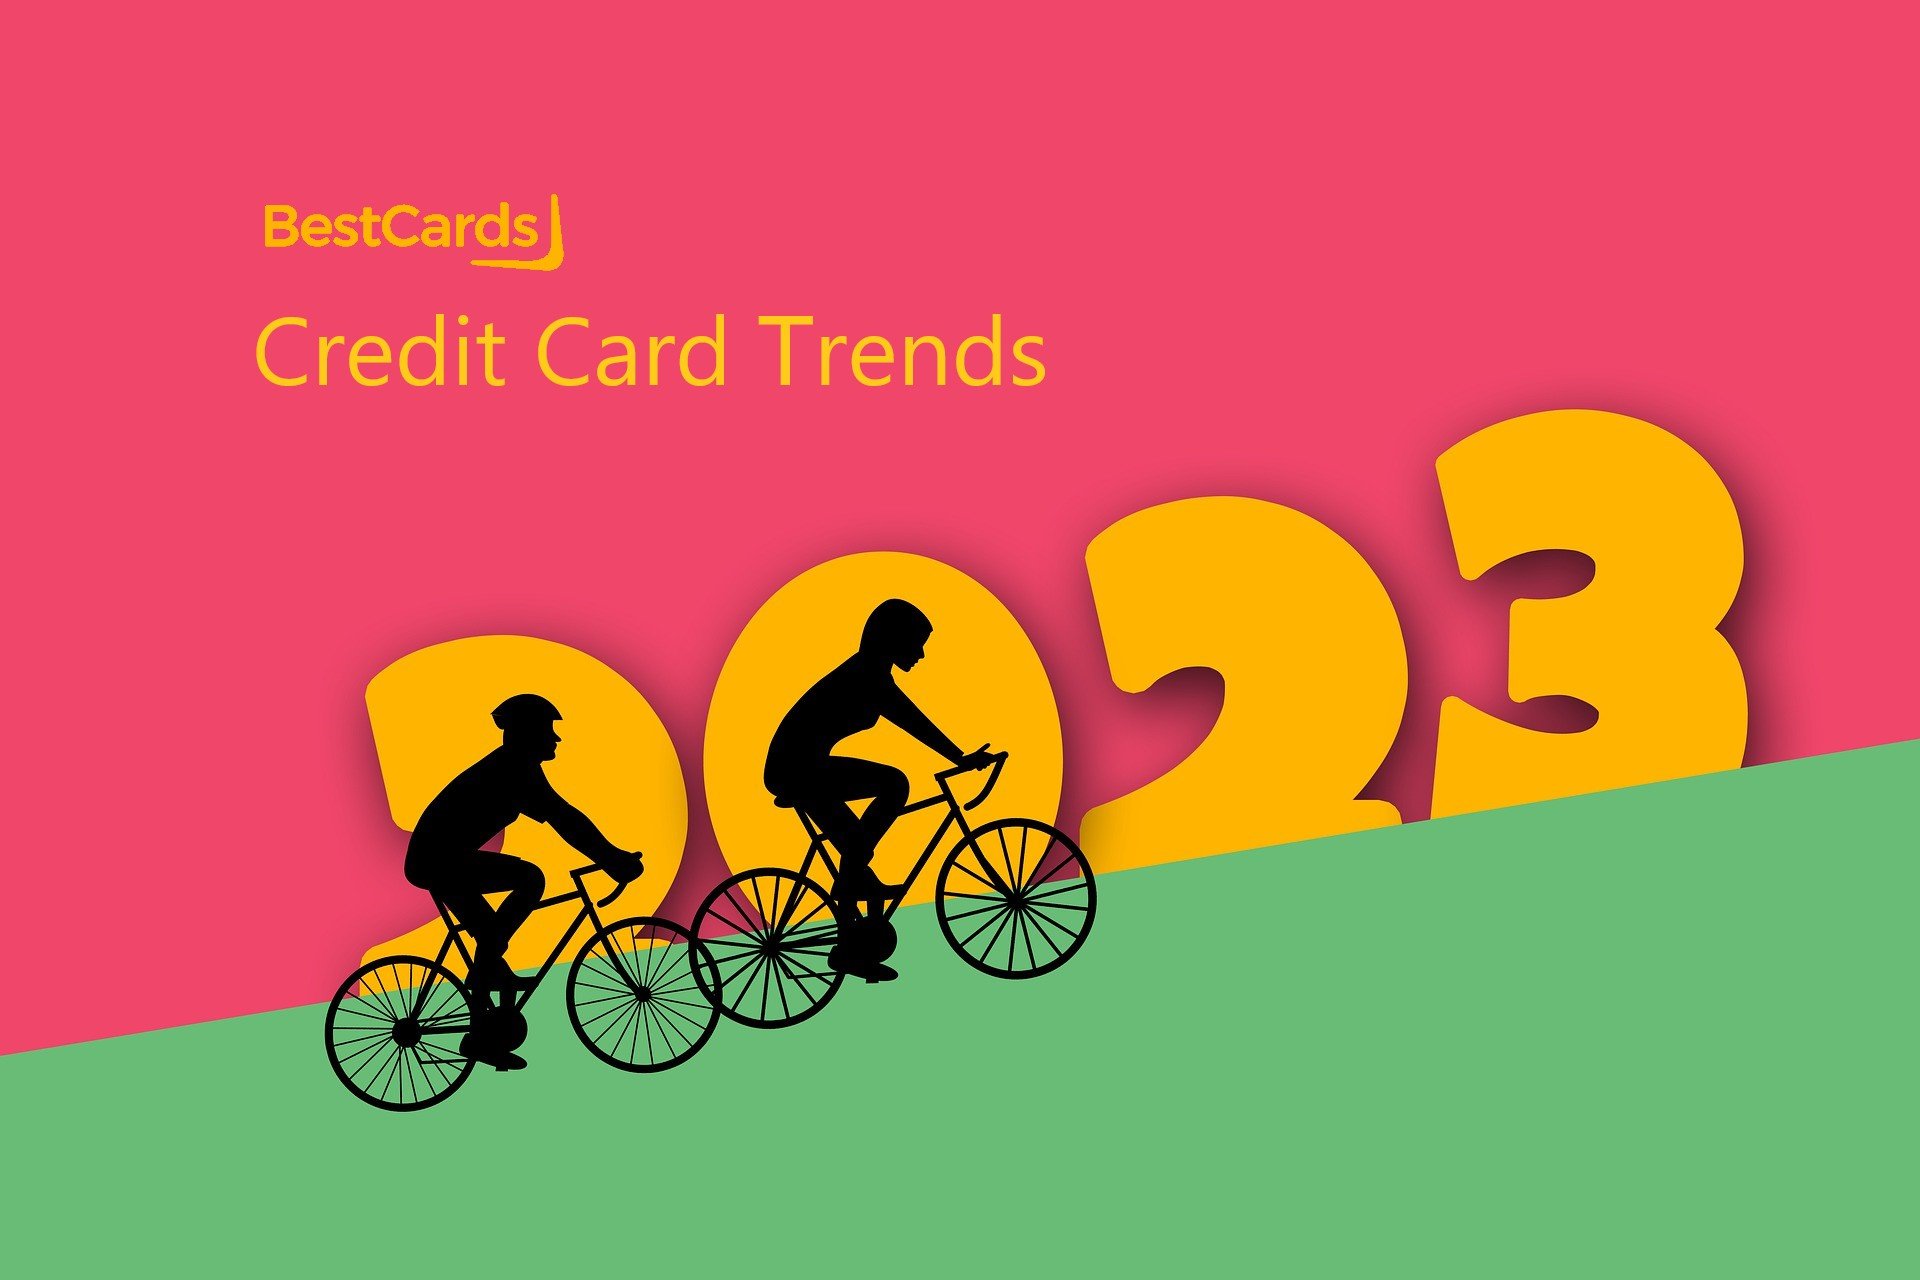 credit card trends to look for in 2023